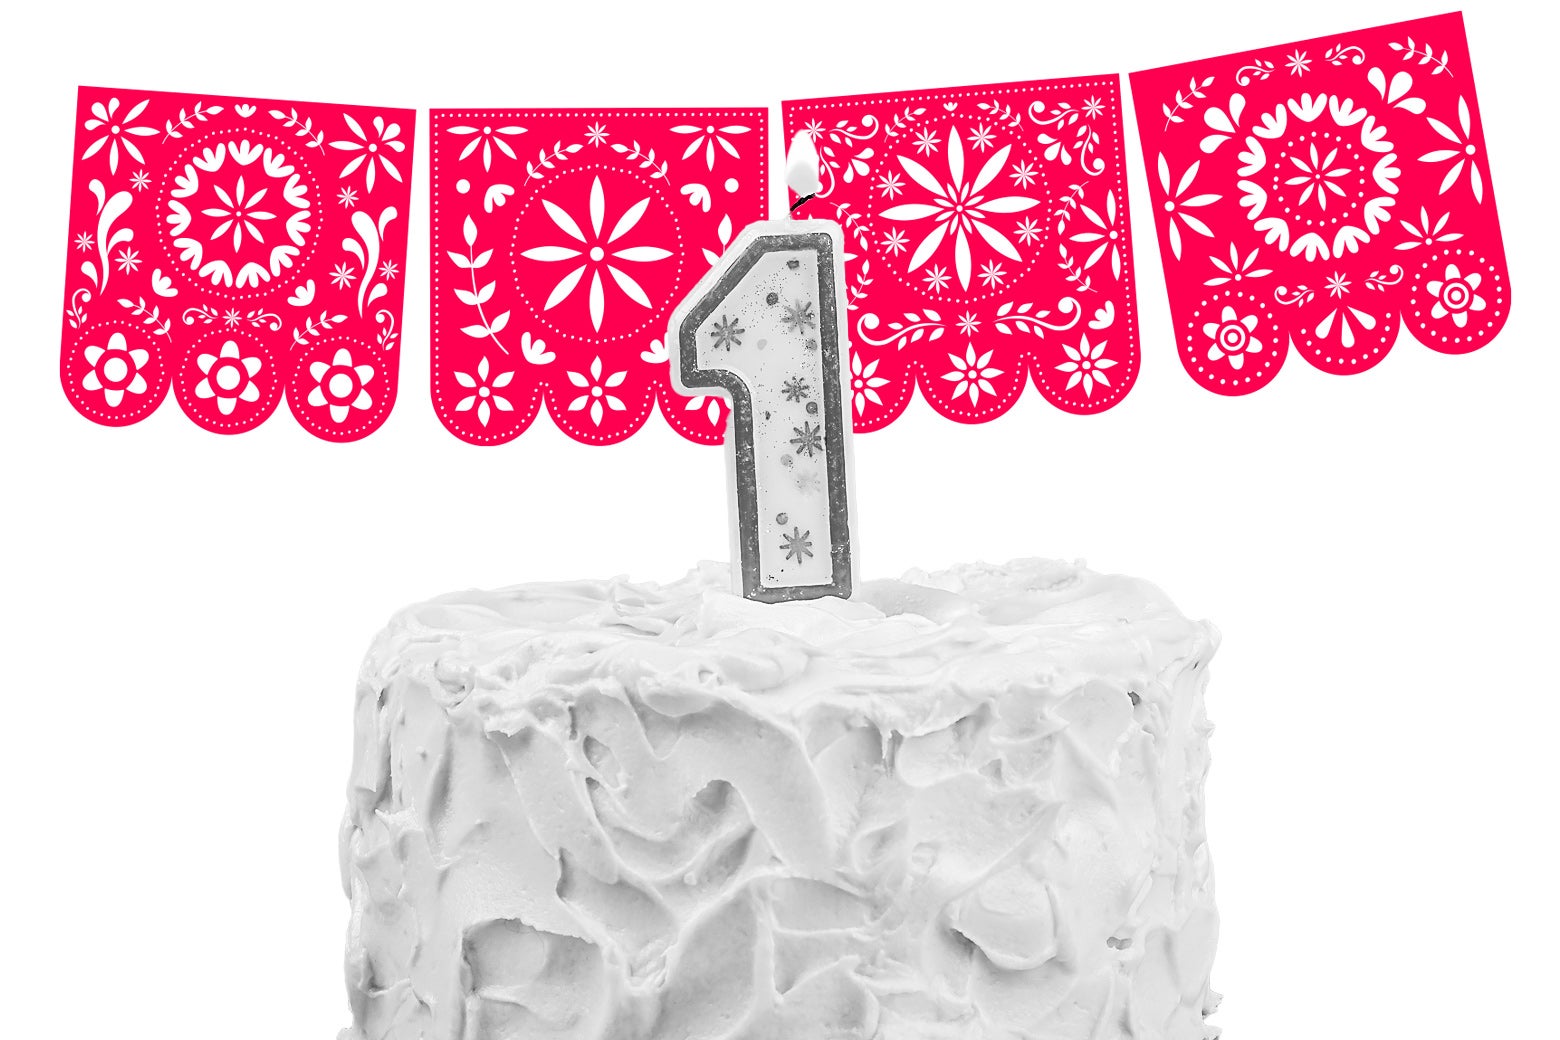 A cake with a 1 candle on it and Mexican paper decorations hanging above